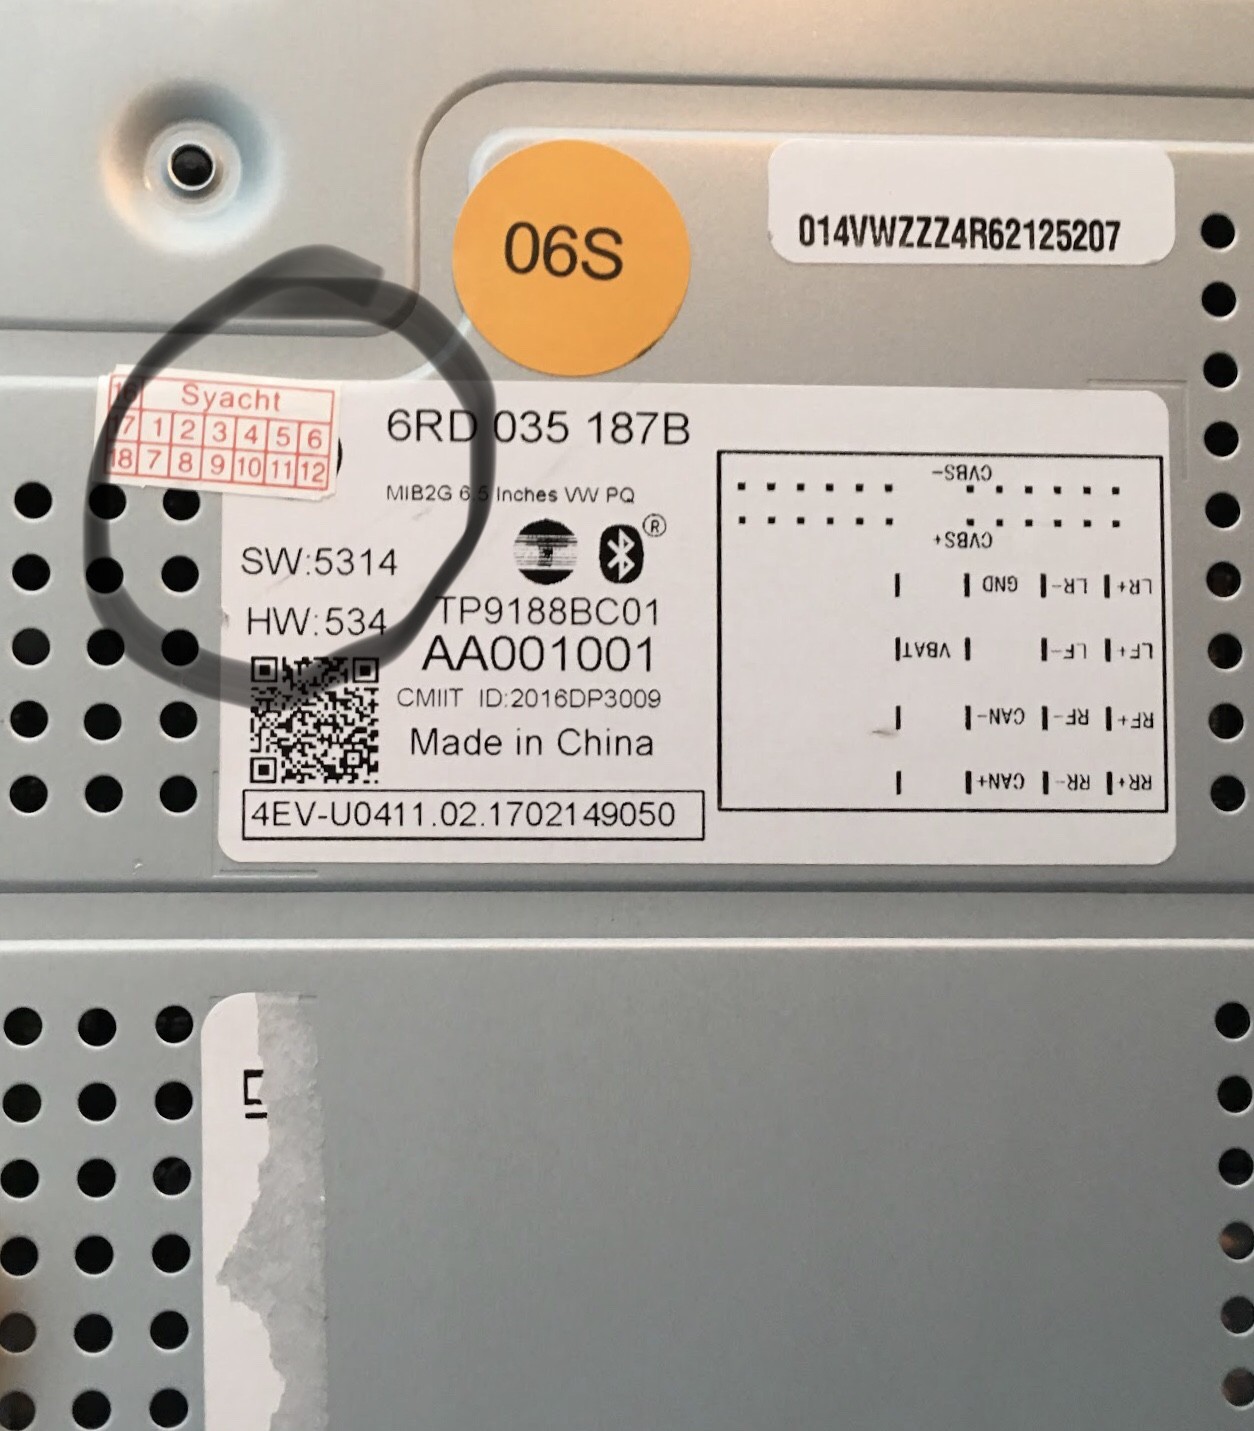 Rcd330 Plus Firmware And Language Update 187b Better Or 187a